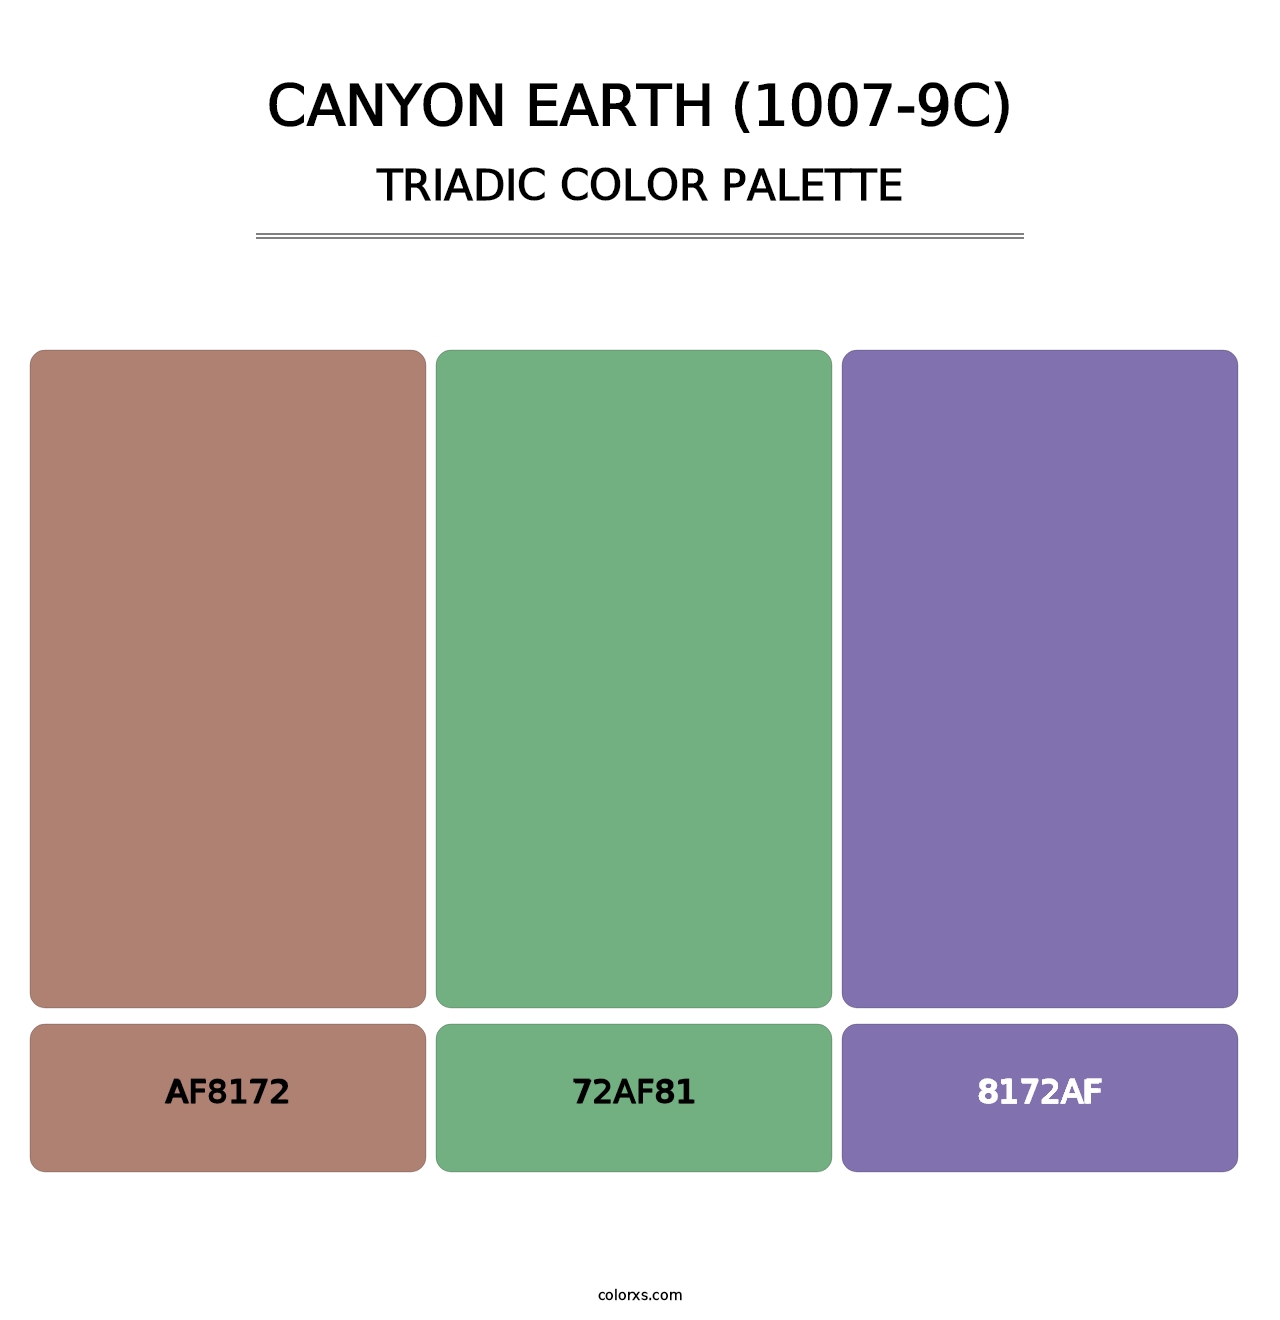 Canyon Earth (1007-9C) - Triadic Color Palette